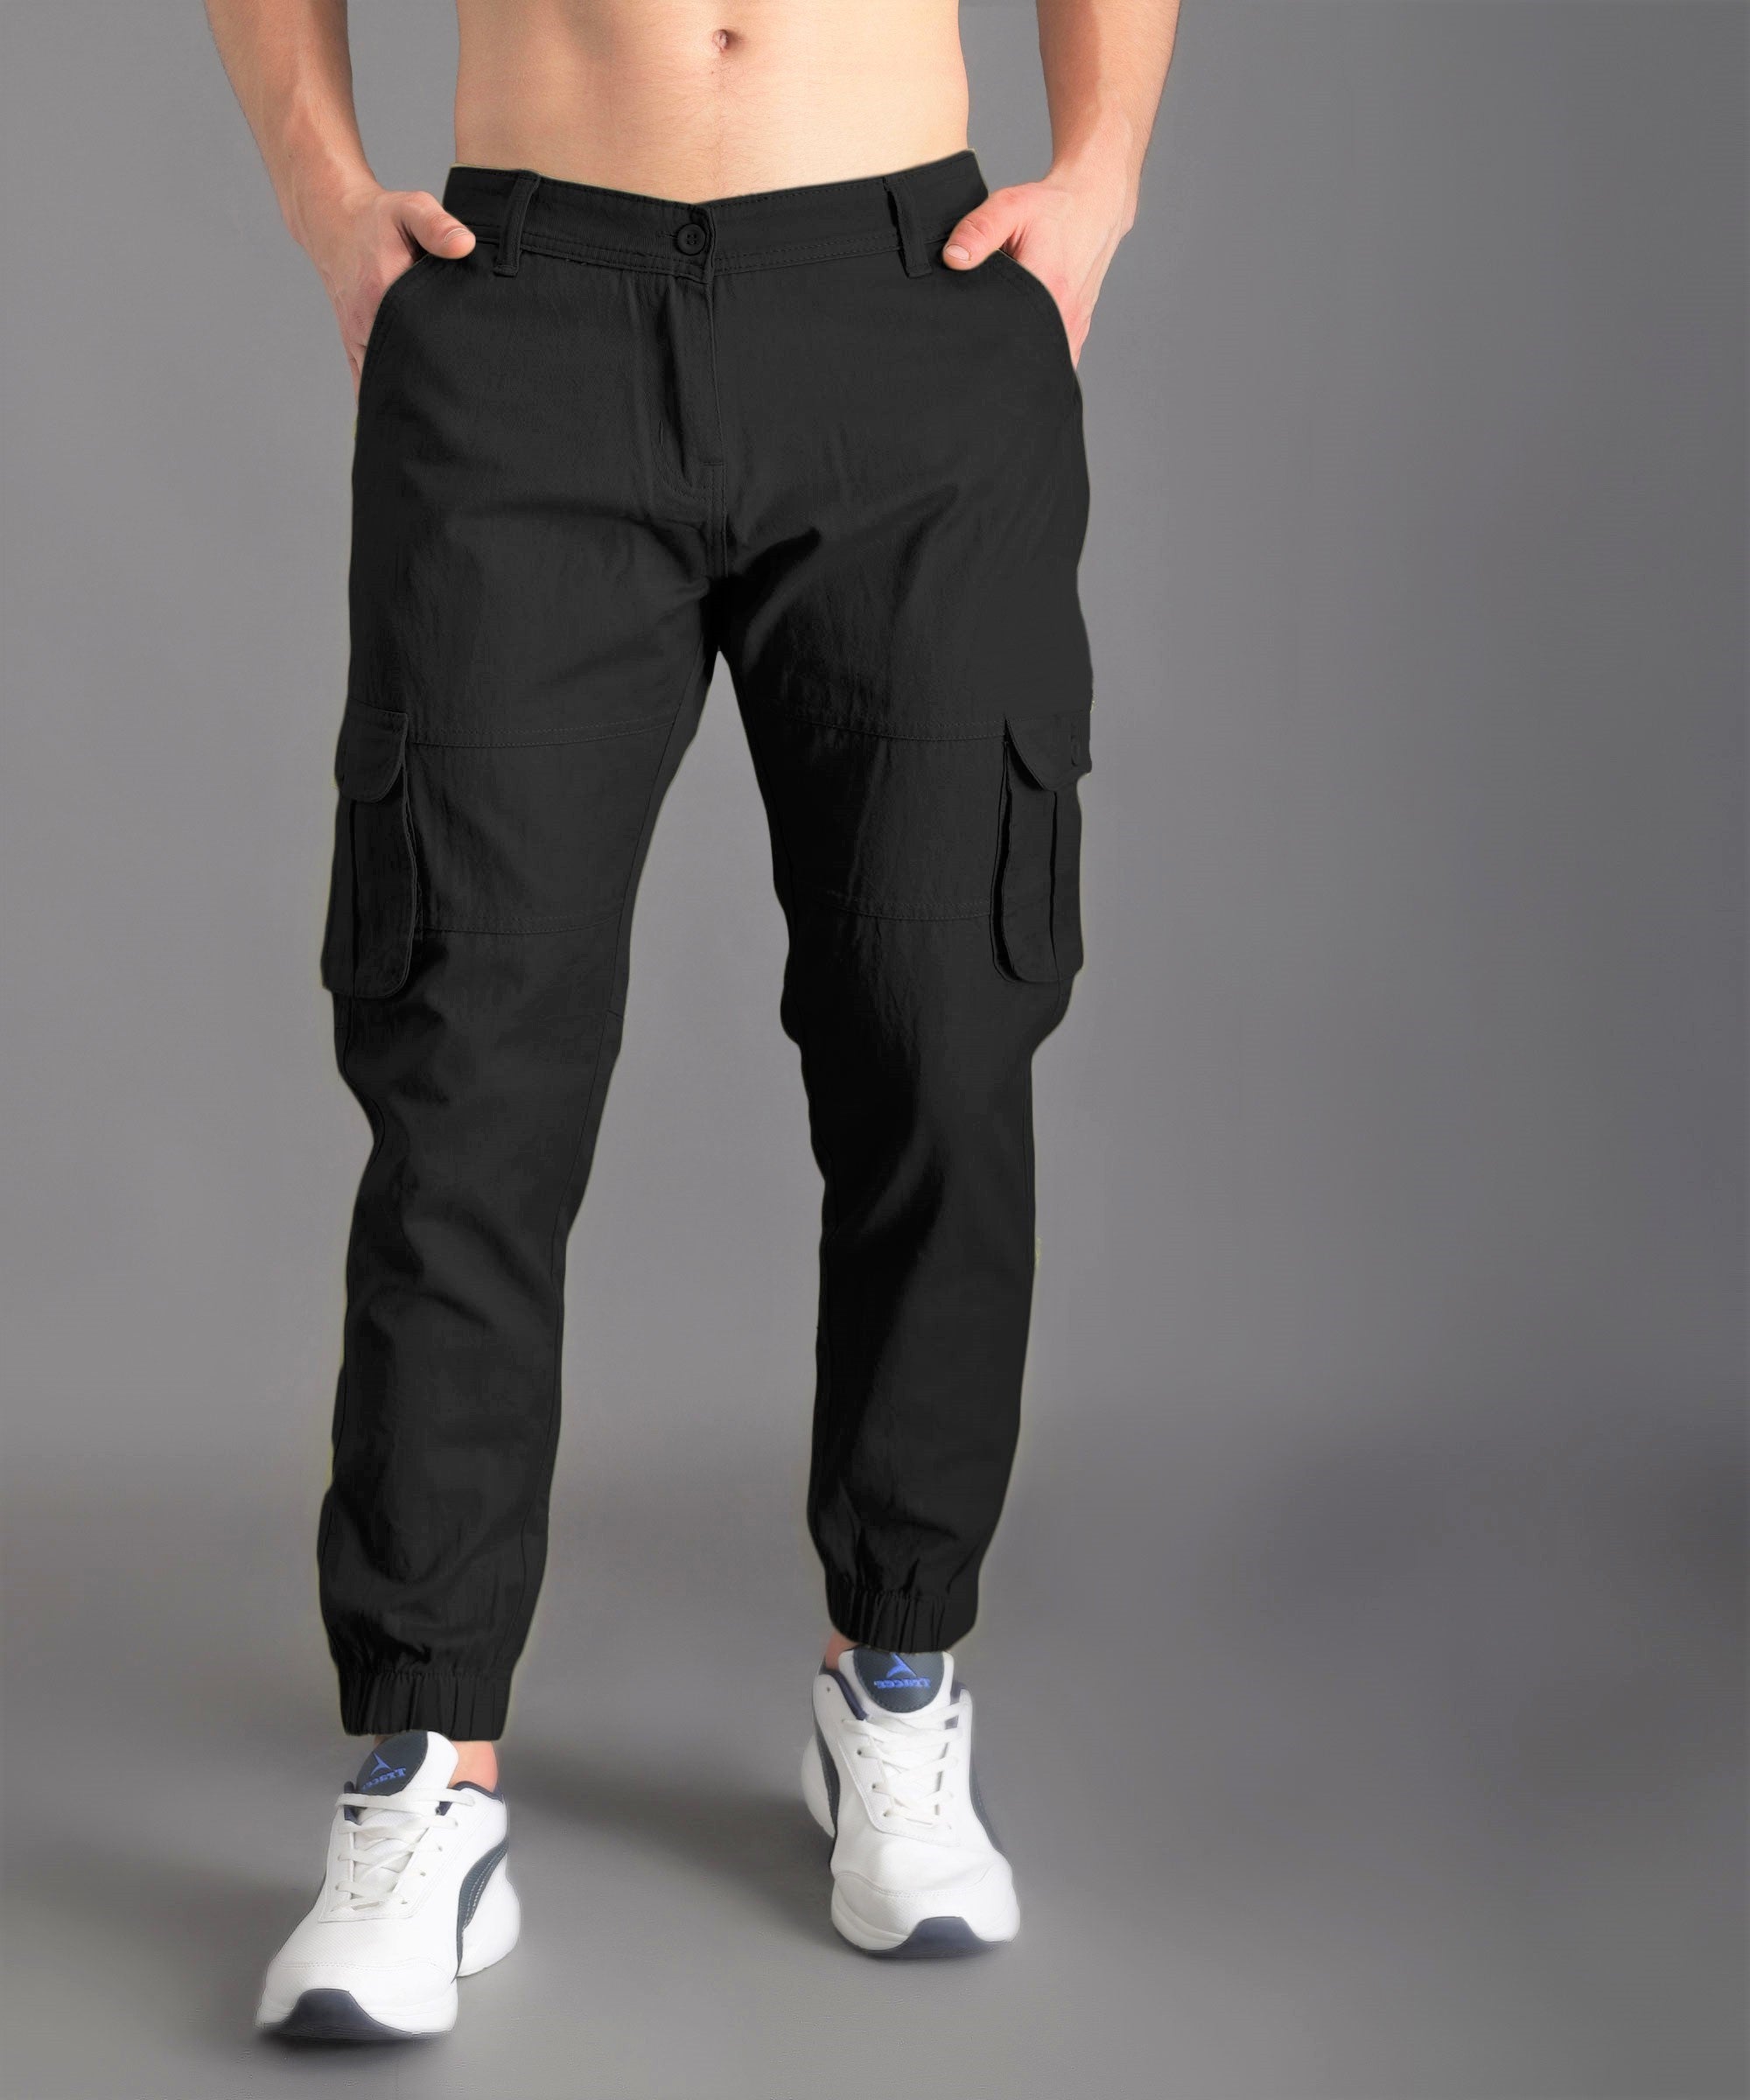 Mens Cuffed Pants  Connor